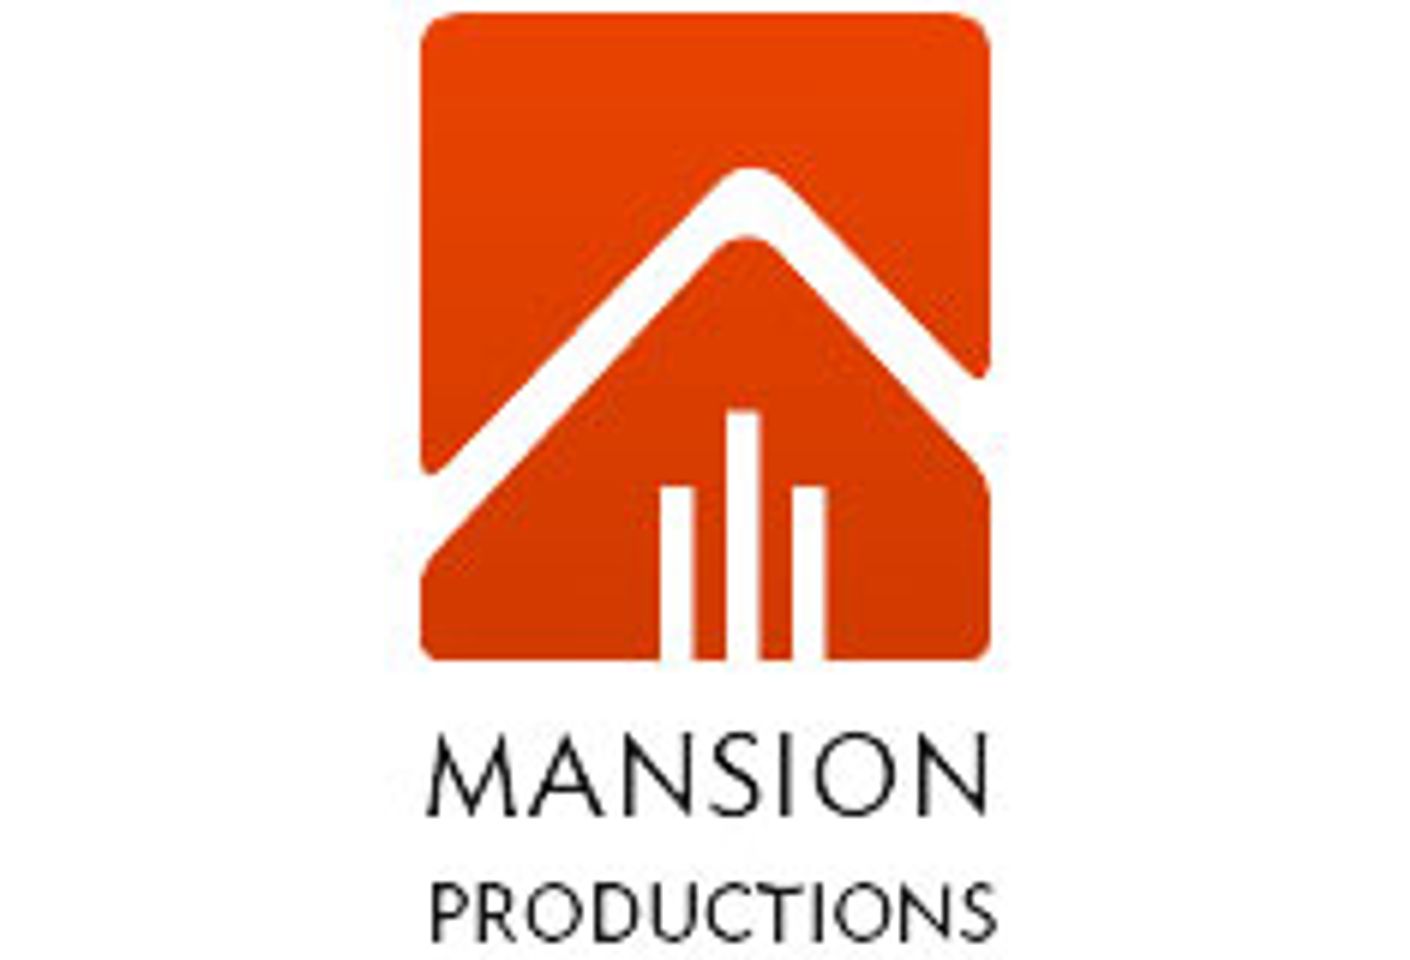 Mansion Offering ‘End of Year Specials’ - MPA3 v5, MAS V2 and Design